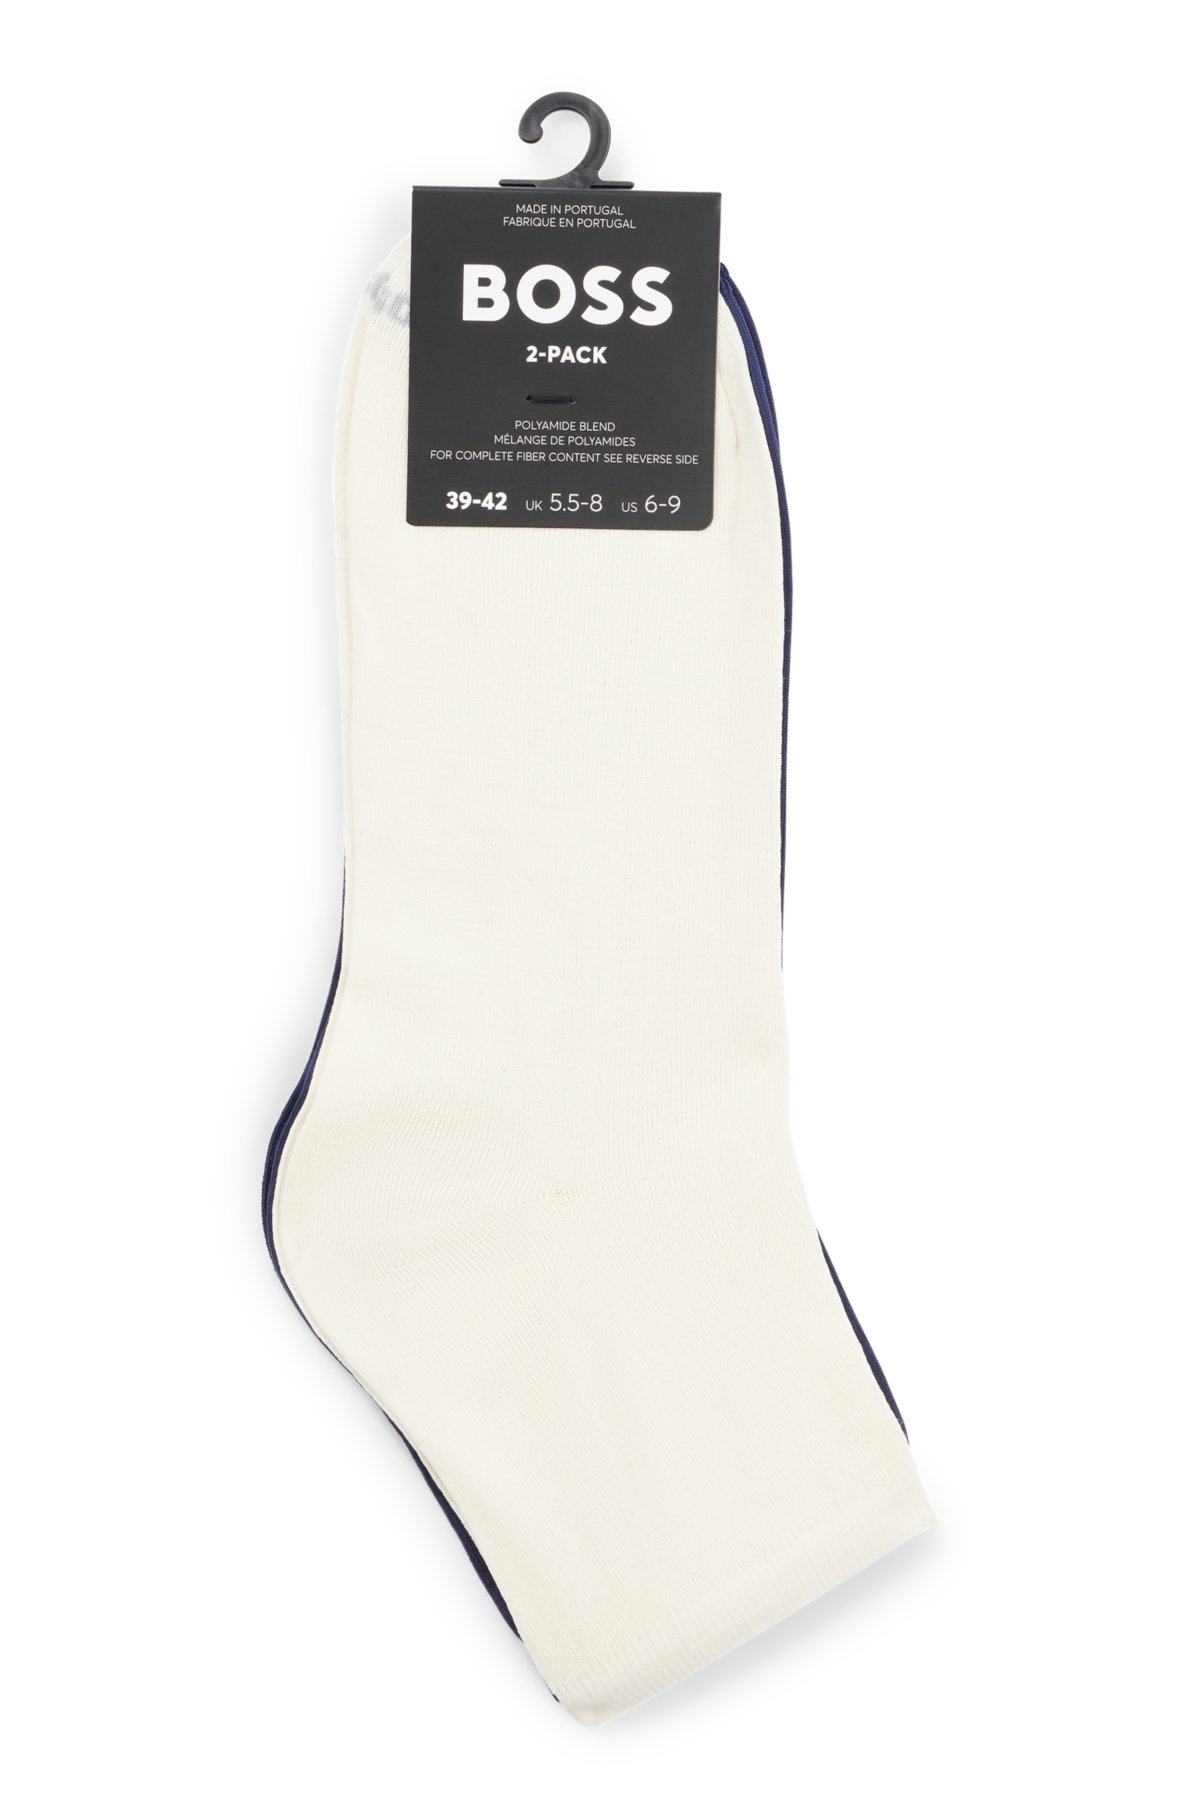 Two-pack of short-length socks in microfibre, Assorted-Pre-Pack